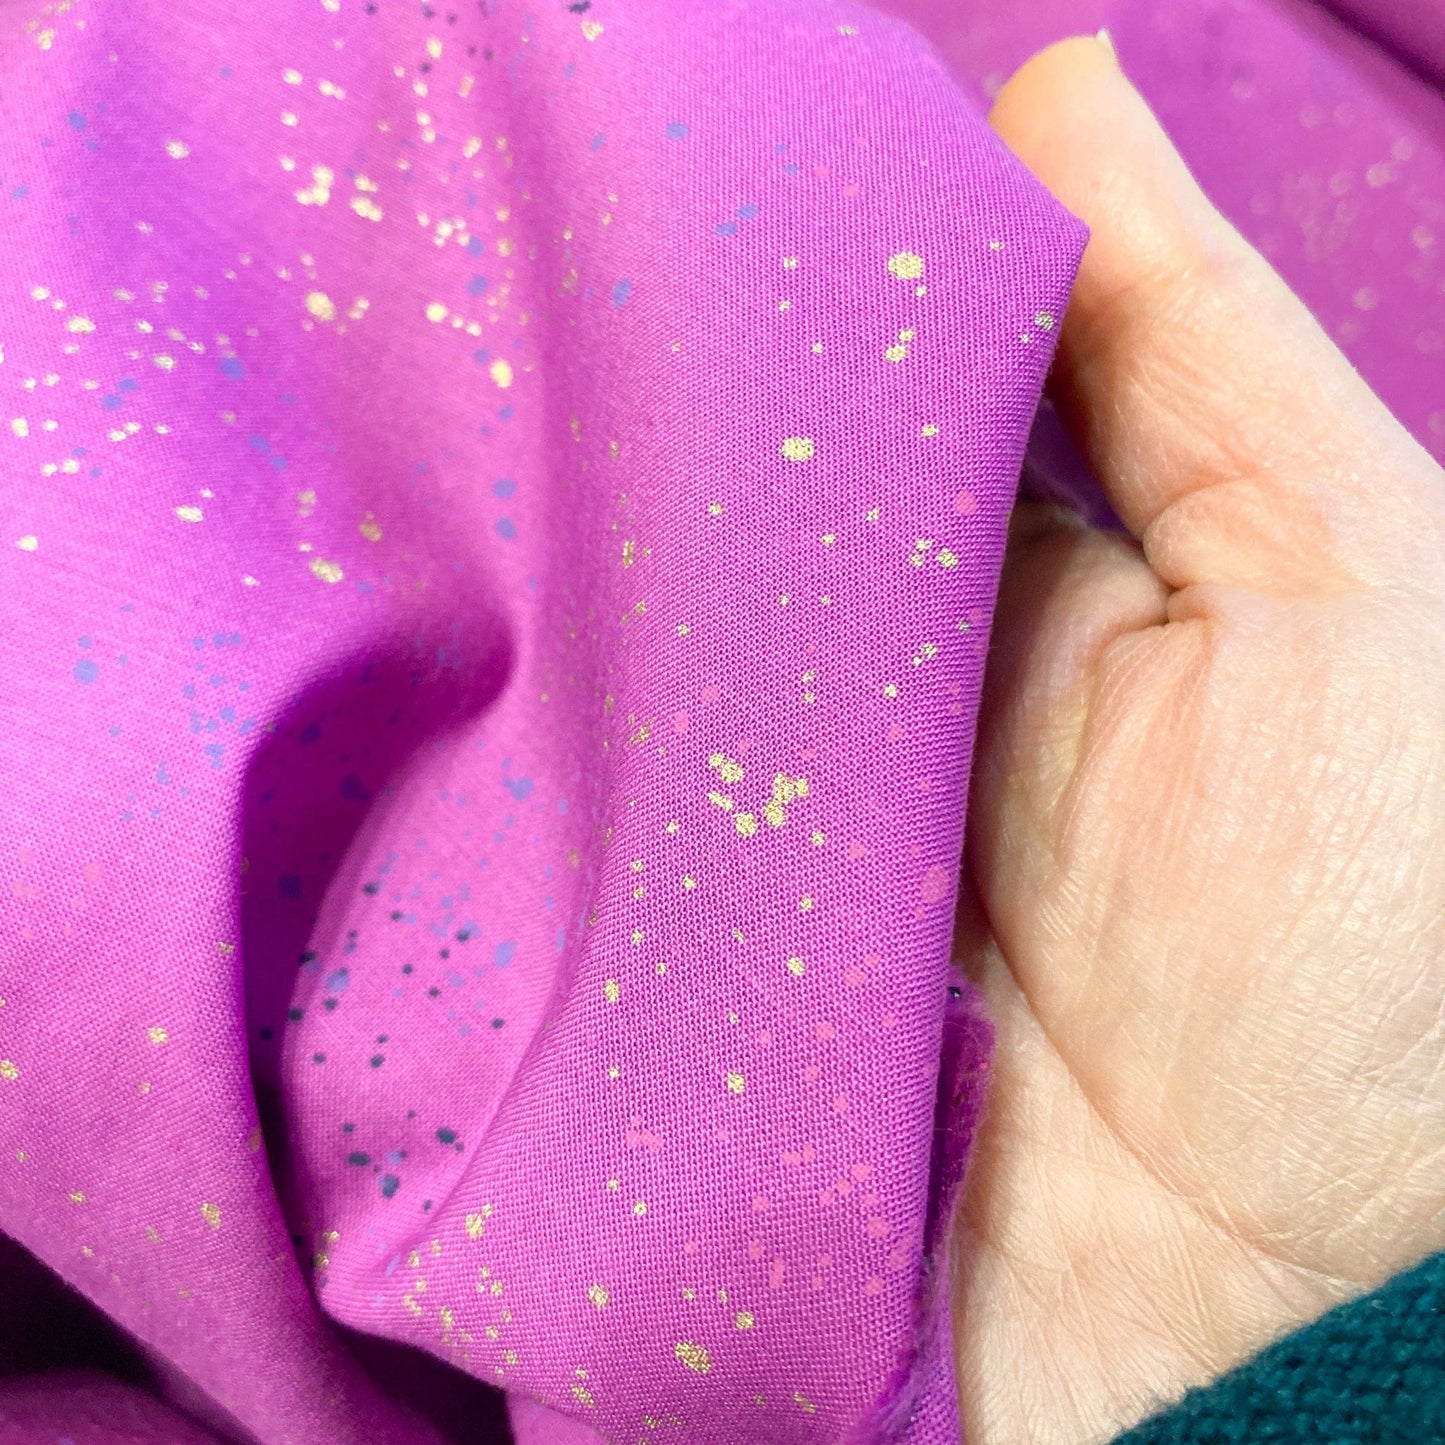 Ruby Star Society 'Speckled' Quilting Cotton in 'Witchy' (Metallic)